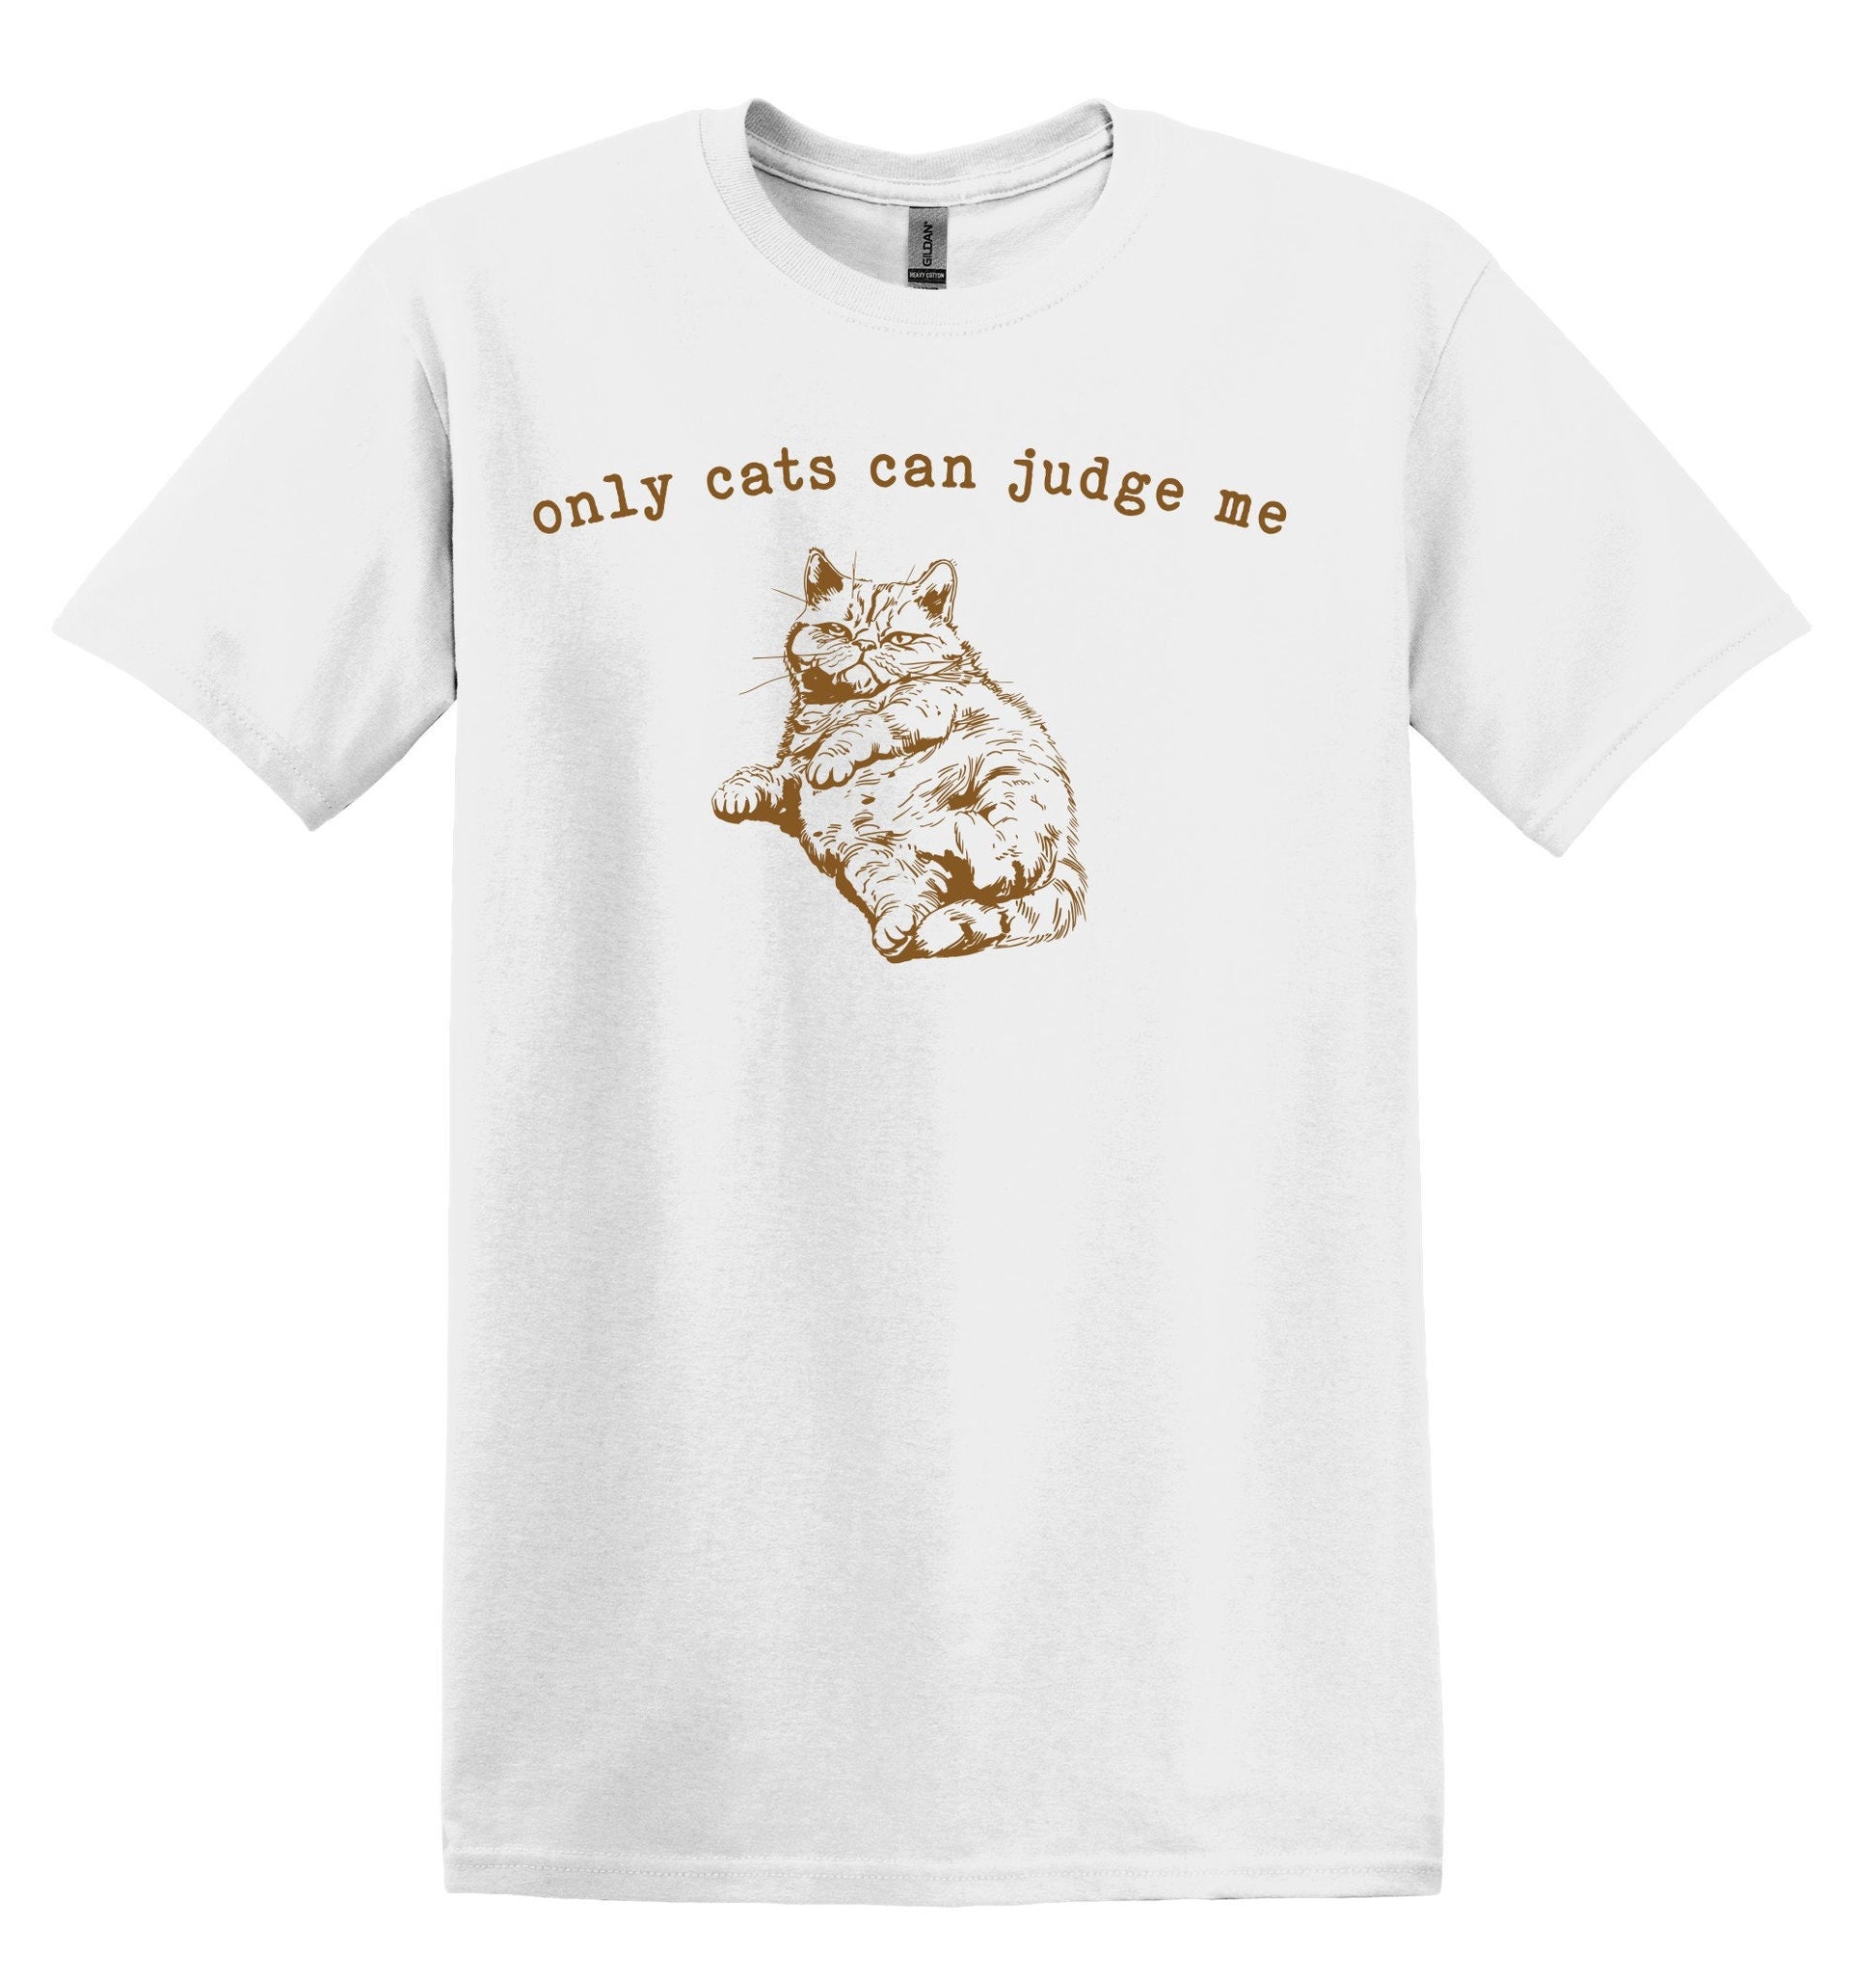 Only Cats Can Judge Me Shirt Graphic Shirt Funny Adult TShirt Vintage Funny TShirt Nostalgia T-Shirt Relaxed Cotton Shirt